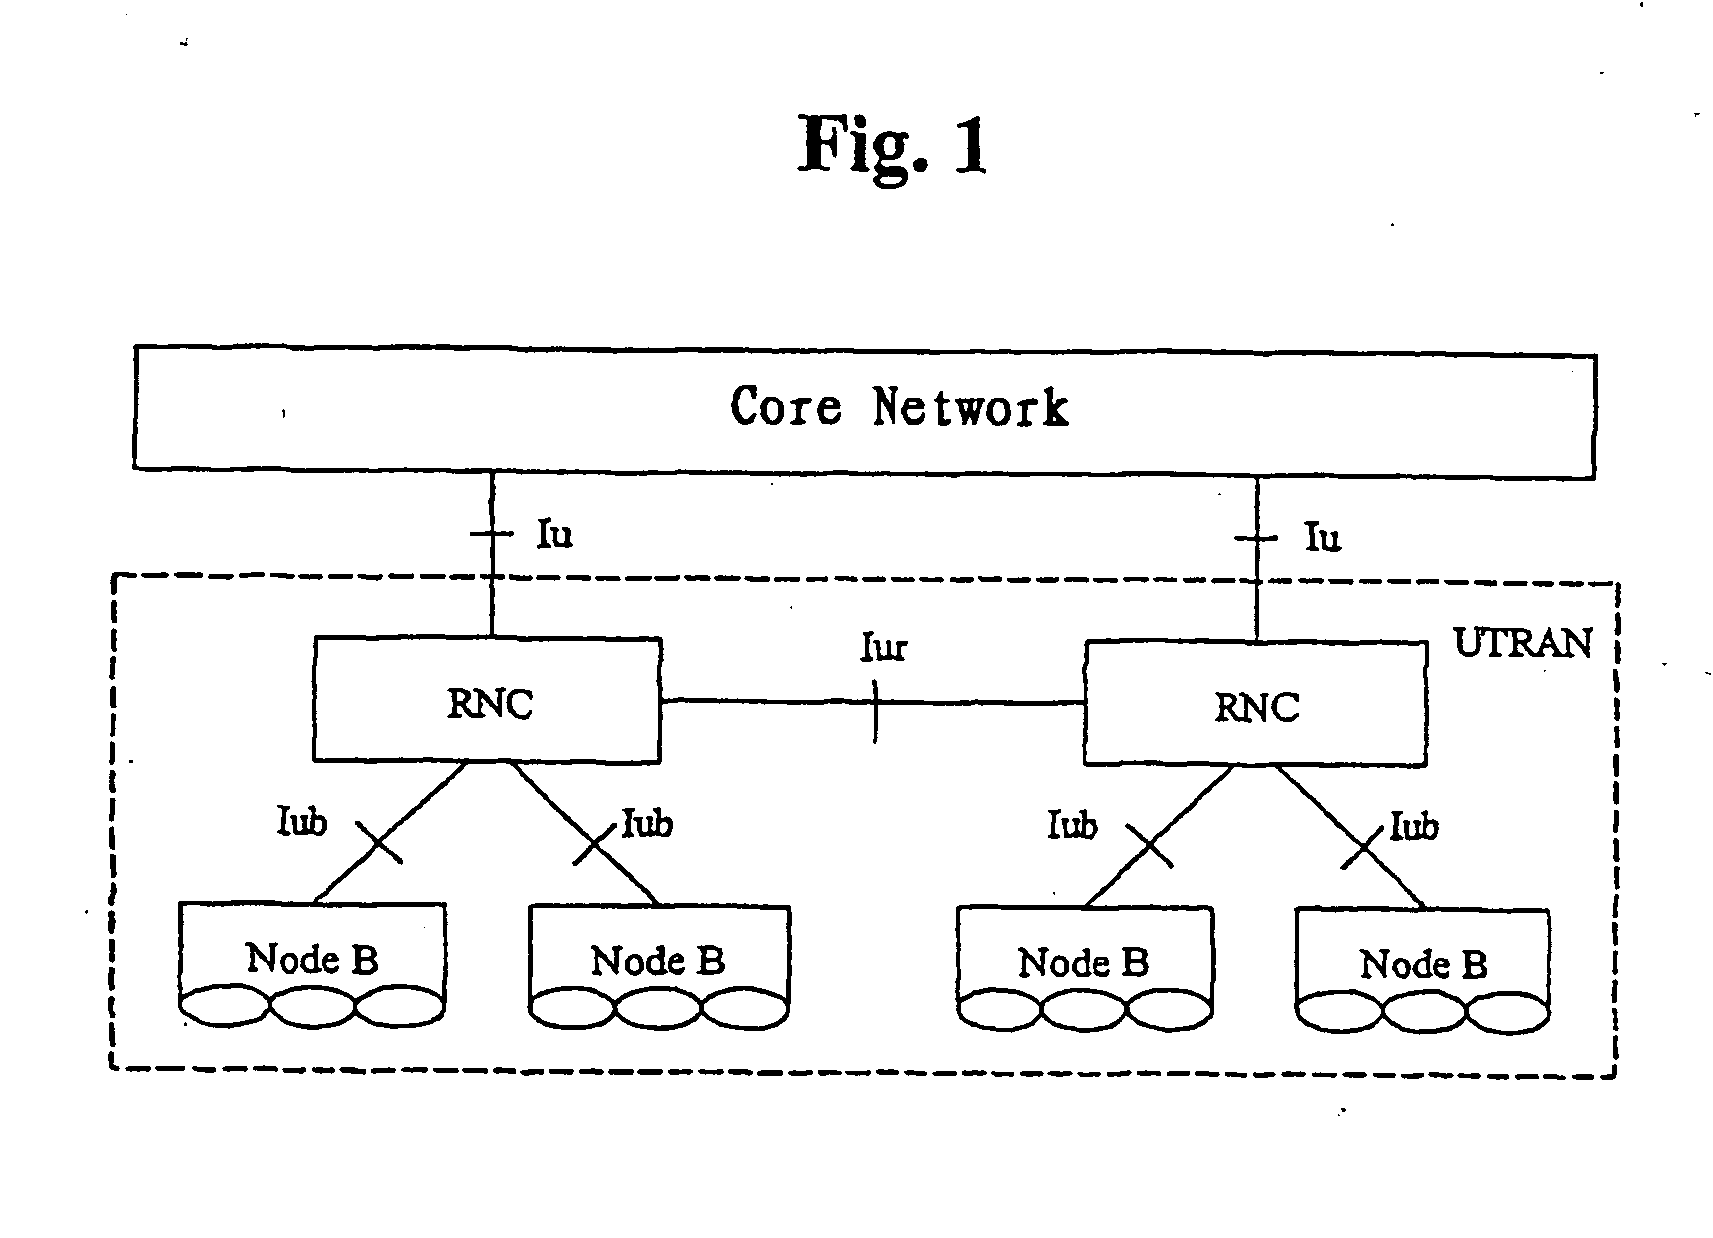 Method of wireless channel resource allocation and rate control in a cdma communication system